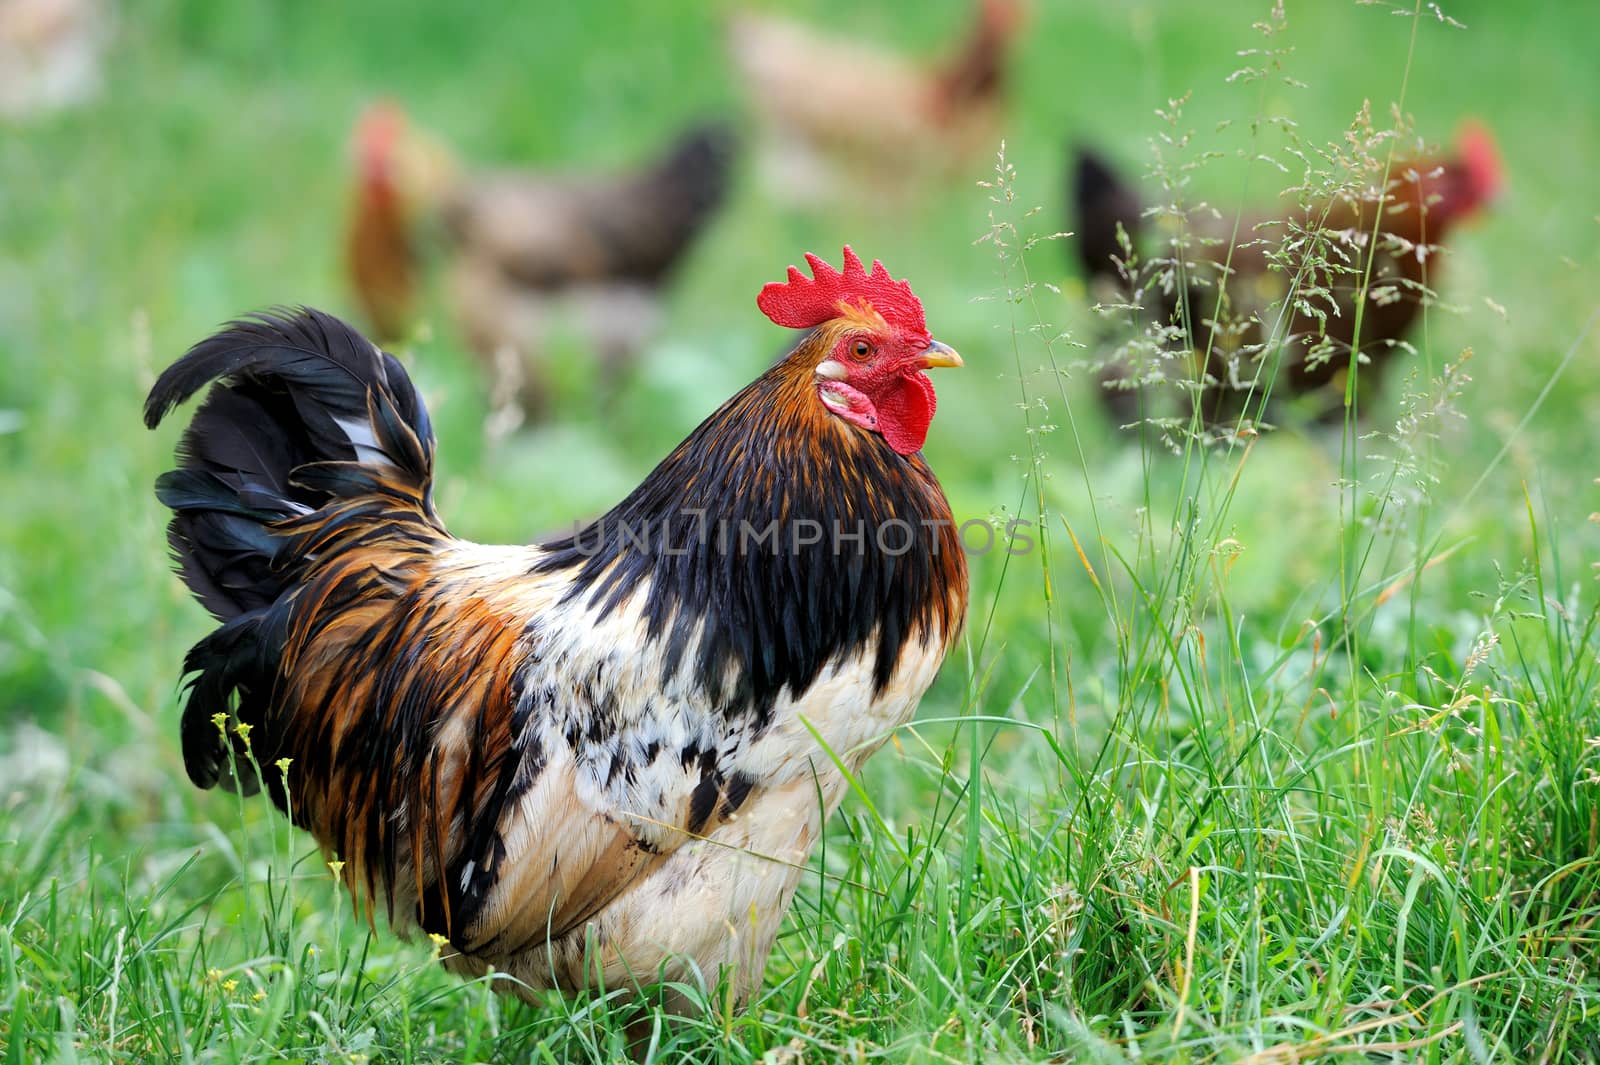 Beautiful Rooster (Male Chicken) on a nature background